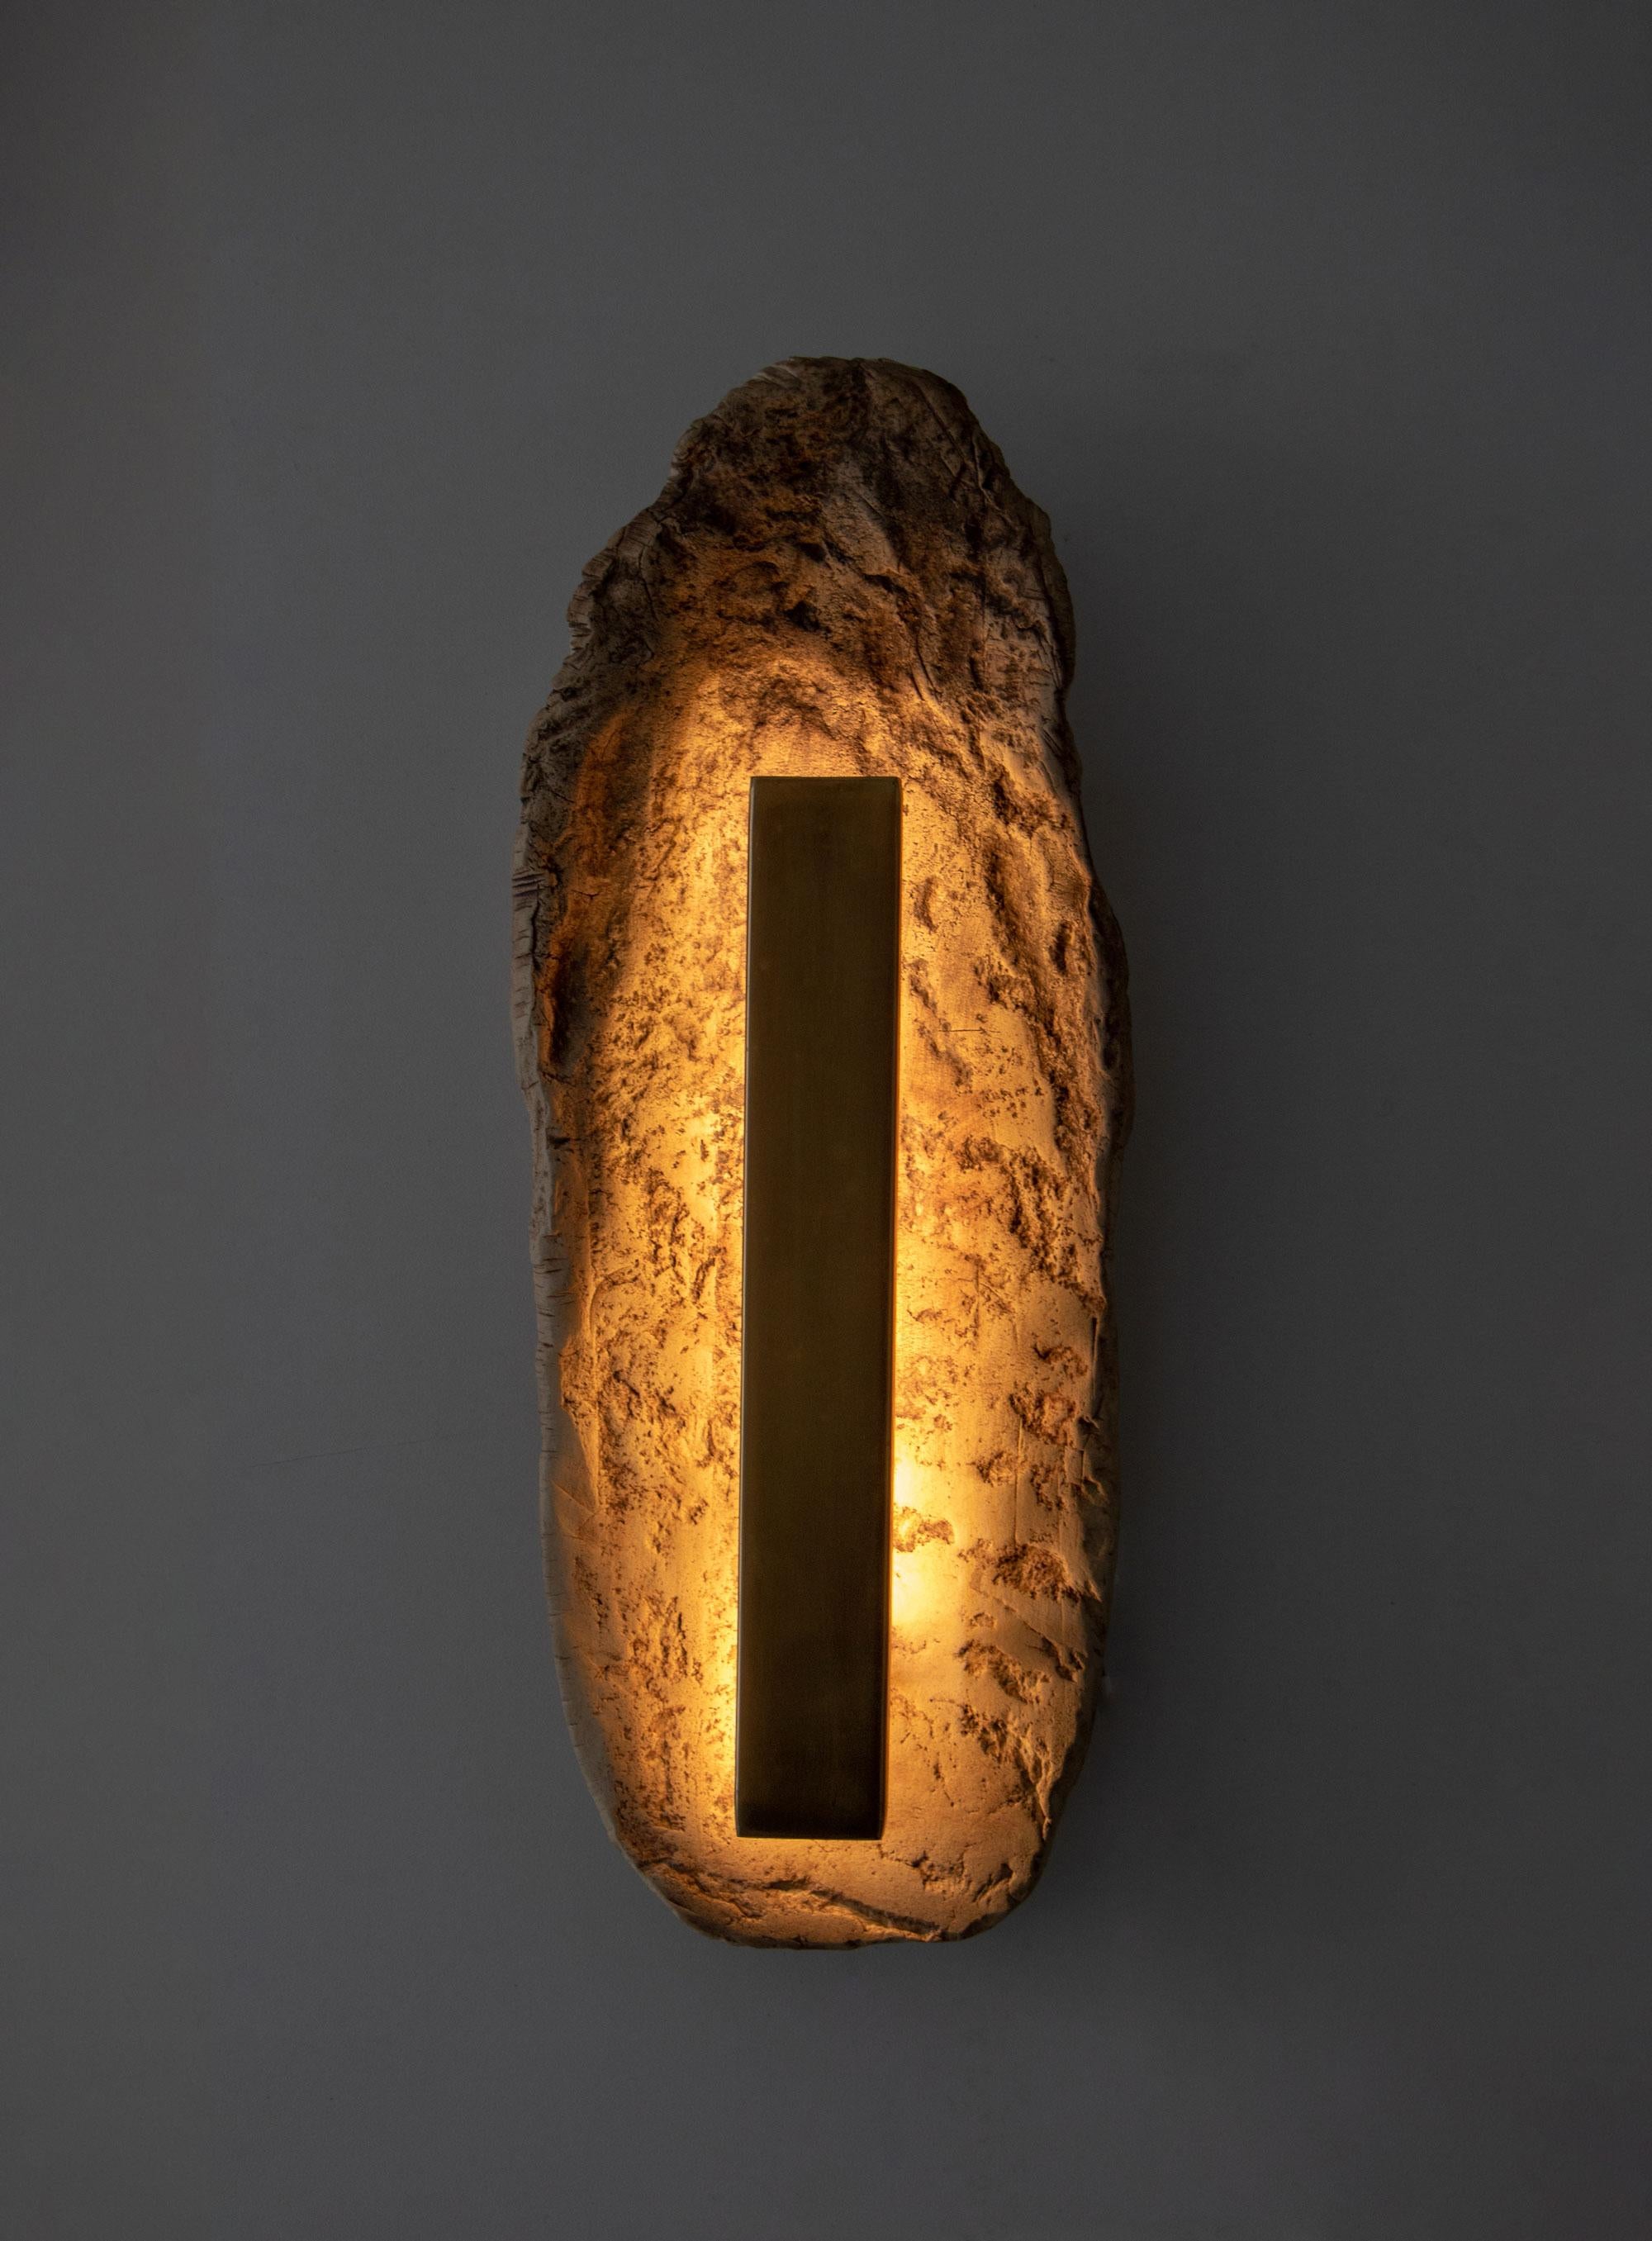 Contemporary Asea 2 Porcelain Sconce, Wall Light handmade by Ceren Gurkan For Sale